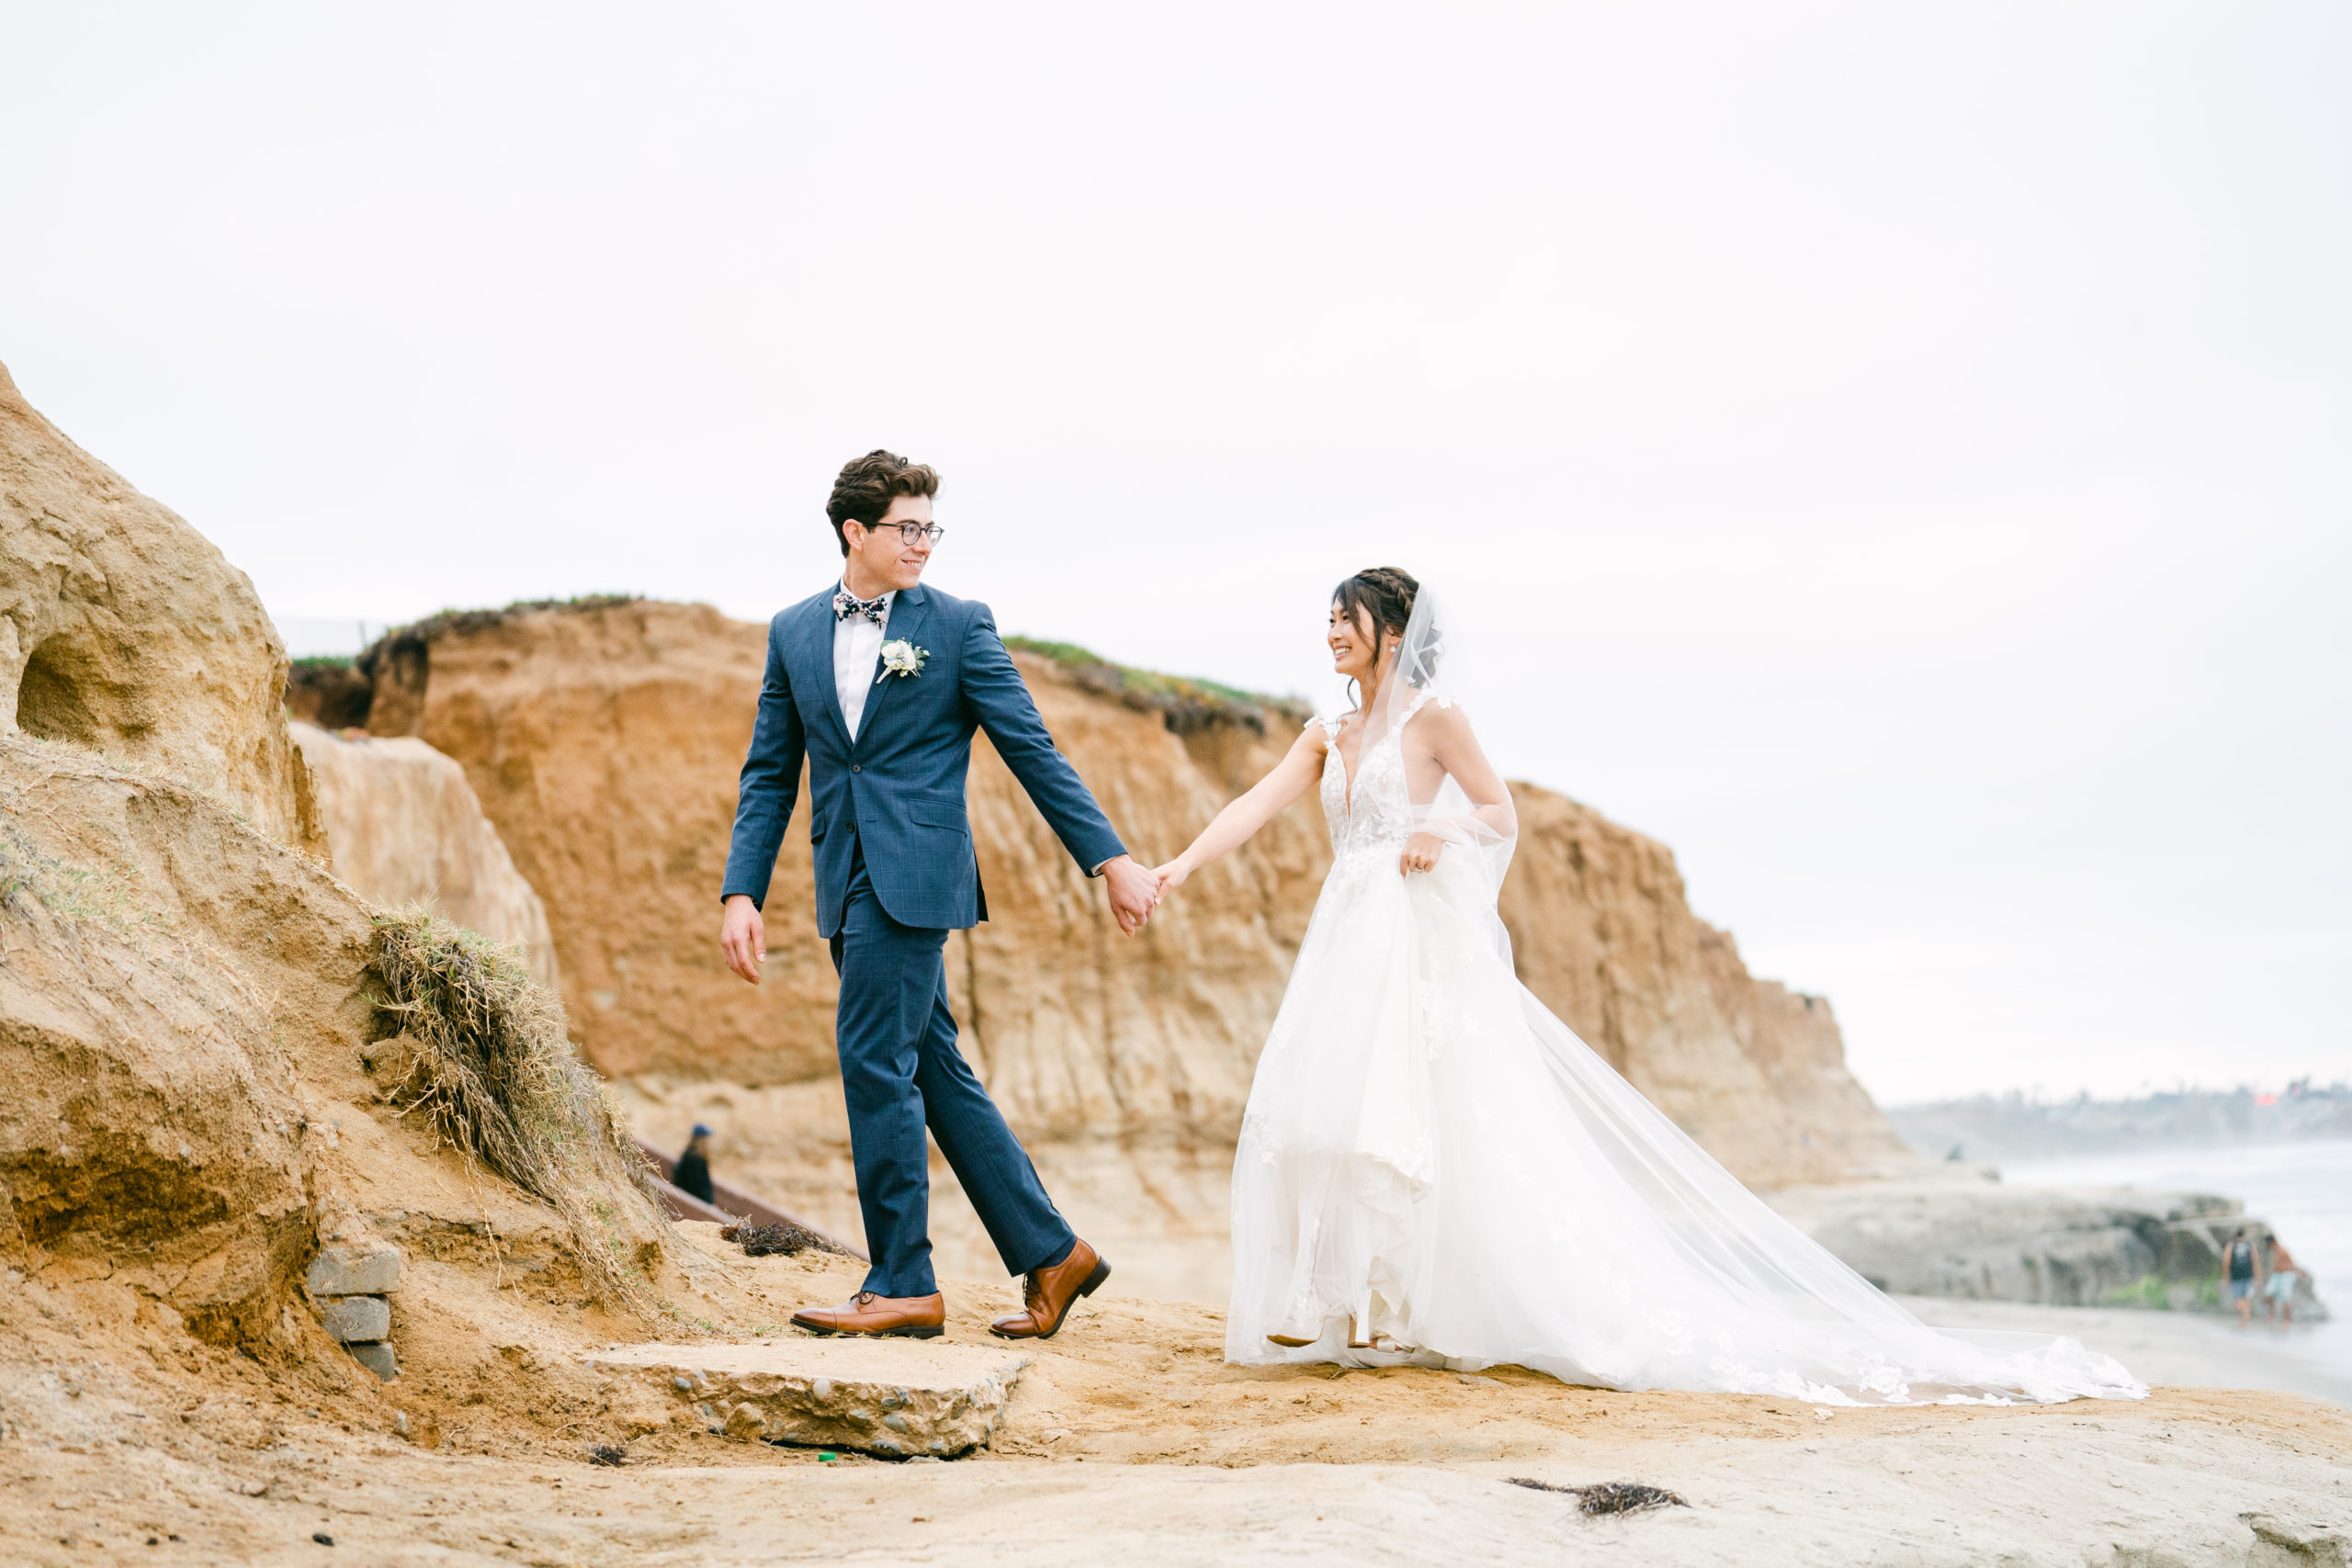 Wedding picture of a bride and groom, Aaron and Kara, on a Carlsbad, California beach. Dressed in a white wedding dress and a navy tux, they are holding hands and smiling at each other as they walk next to the cliffs. The photo was taken by Kate Noelle Photography.